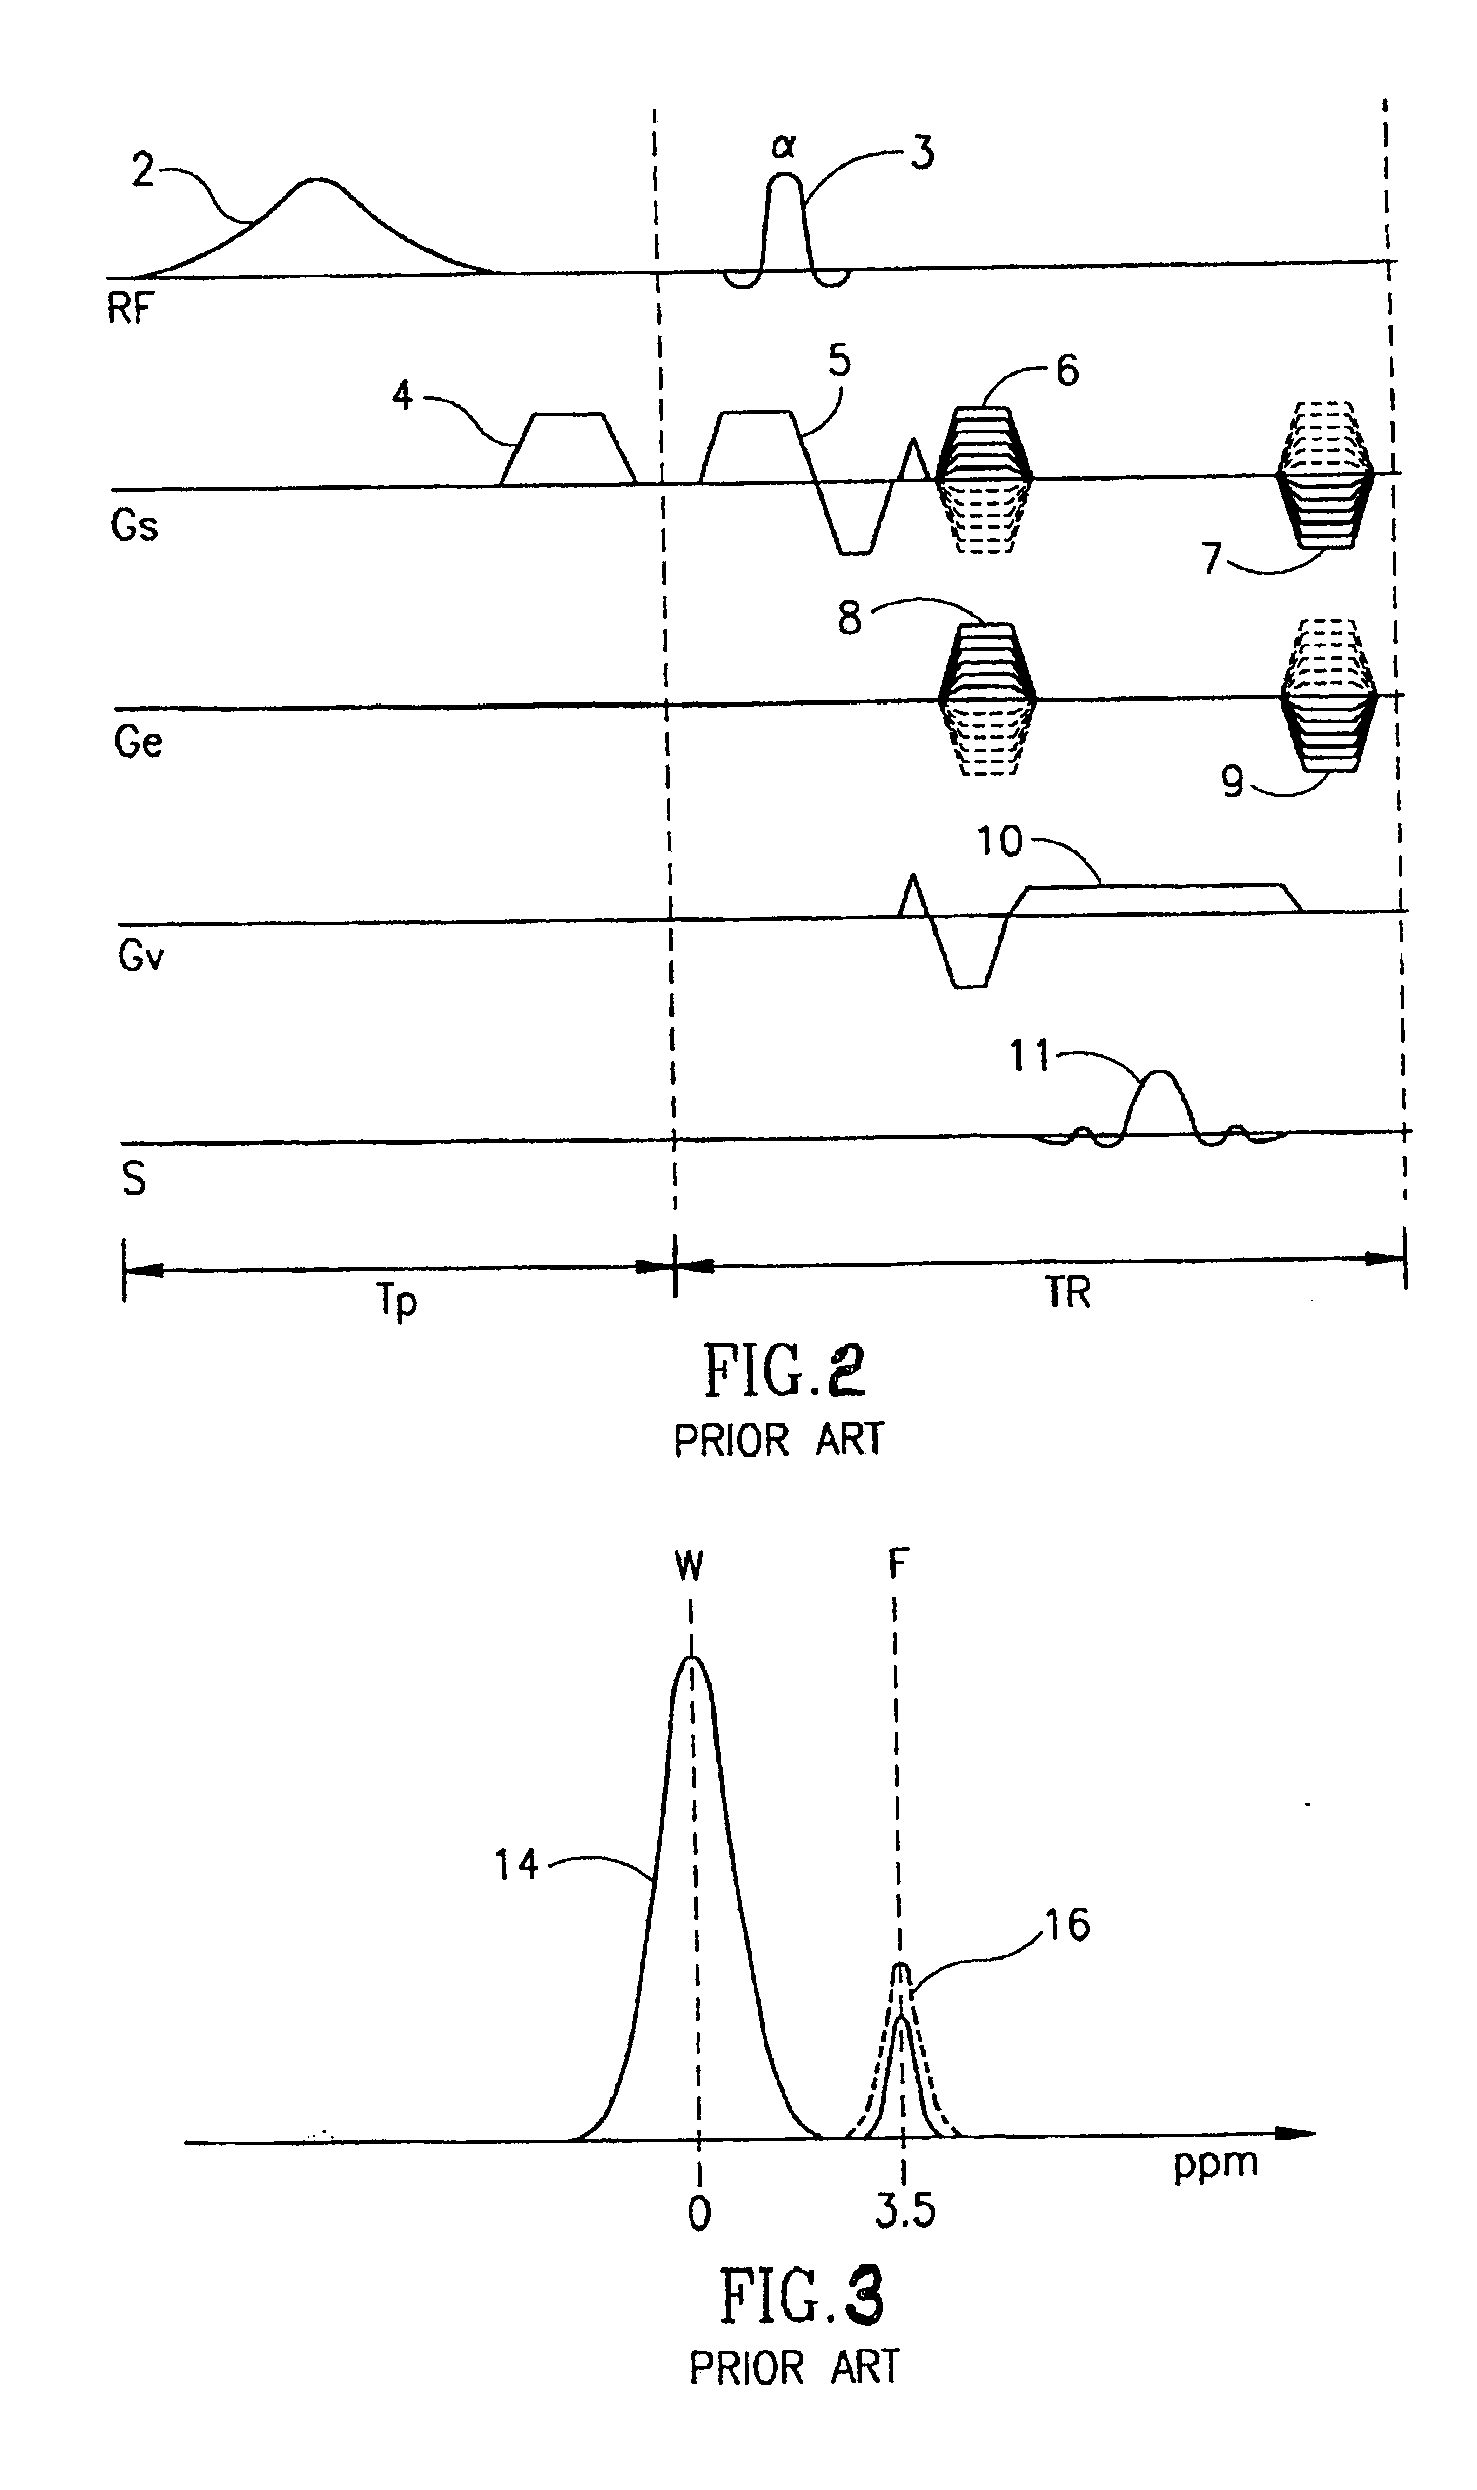 Magnetic resonance image acquisition with suppression of background tissues and RF water excitation at offset frequency